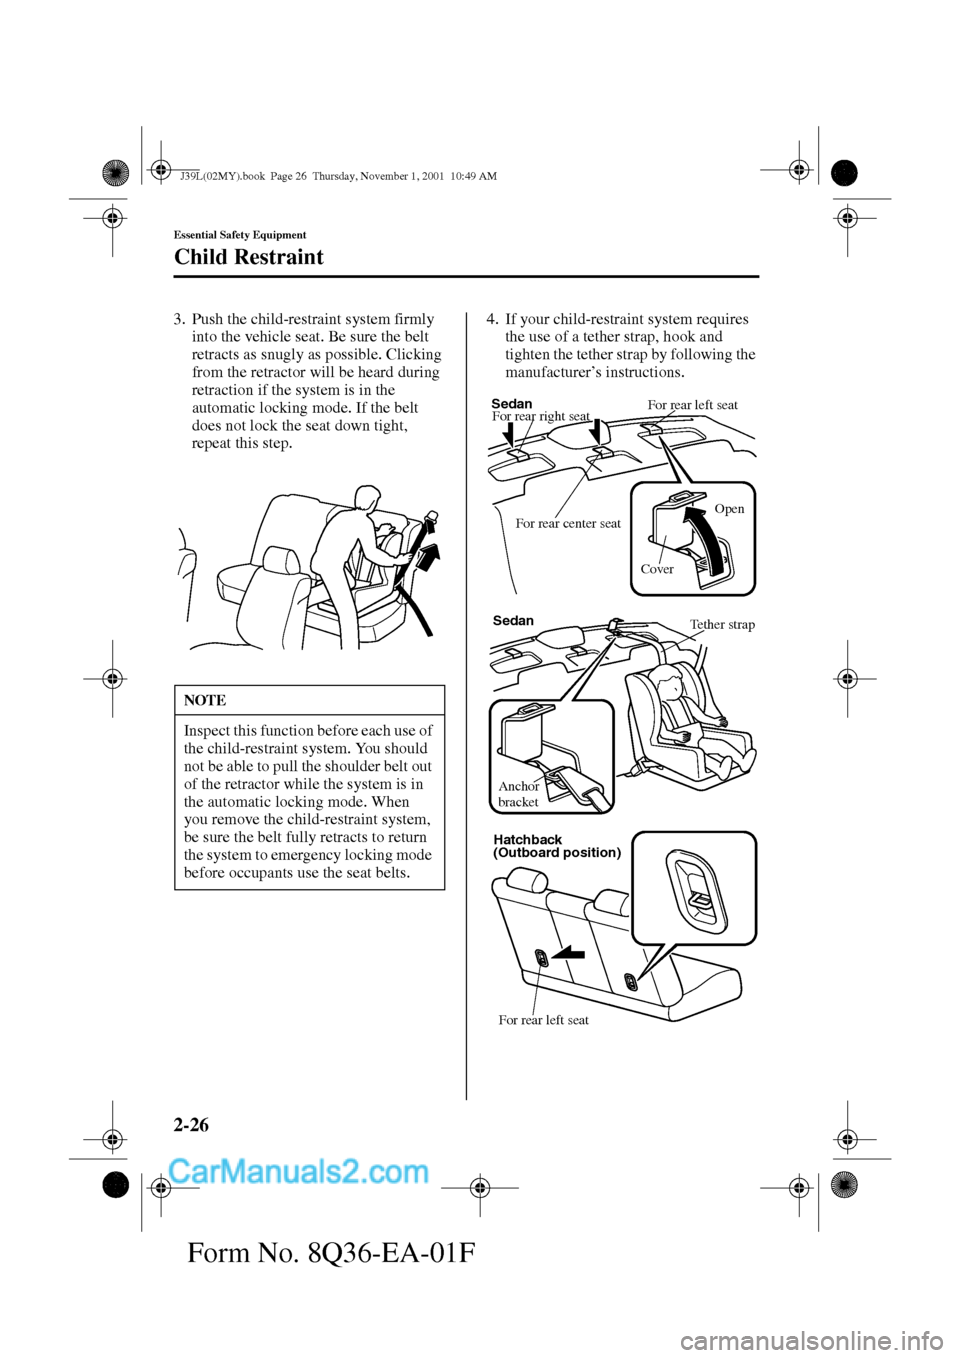 MAZDA MODEL PROTÉGÉ 2002  Owners Manual (in English) 2-26
Essential Safety Equipment
Child Restraint
Form No. 8Q36-EA-01F
3. Push the child-restraint system firmly 
into the vehicle seat. Be sure the belt 
retracts as snugly as possible. Clicking 
from 